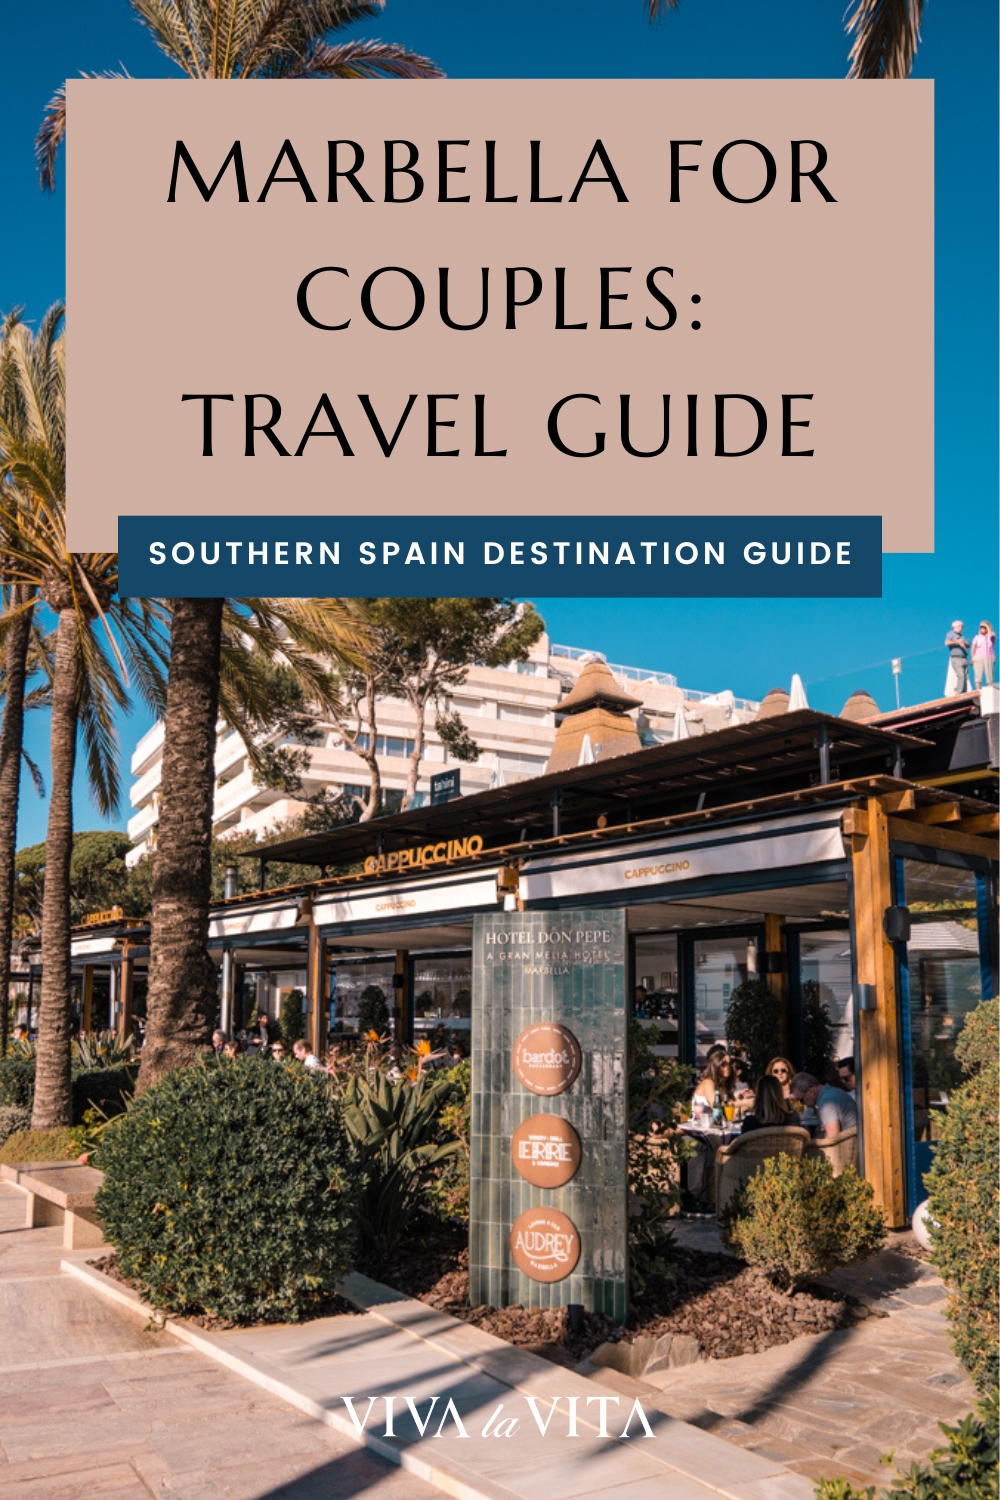 pinterest image showing a luxury restaurant by the coastline, in Marbella on costa del sol, Southern spain, with a headline - marbella for couples: travel guide